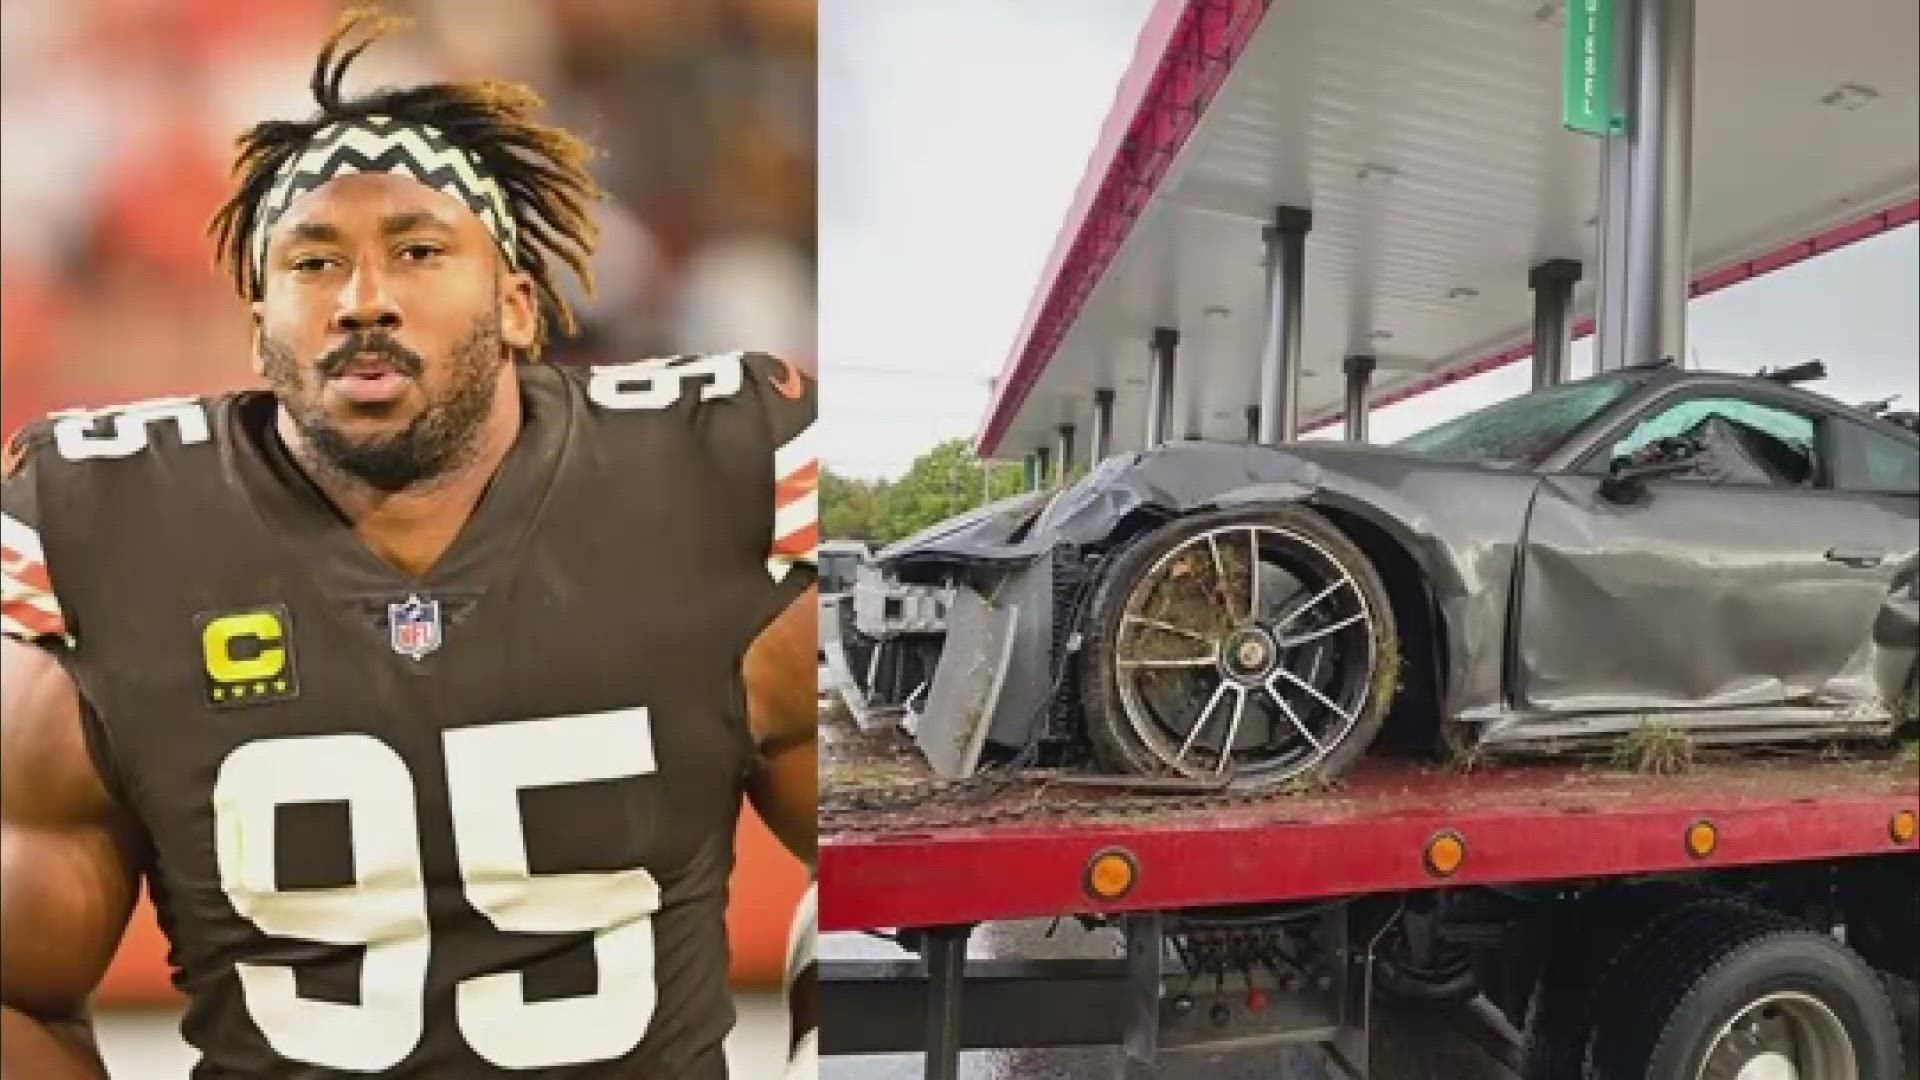 Cleveland Browns defensive end Myles Garrett and a female passenger suffered non-life-threatening injuries in a car crash on Monday afternoon.